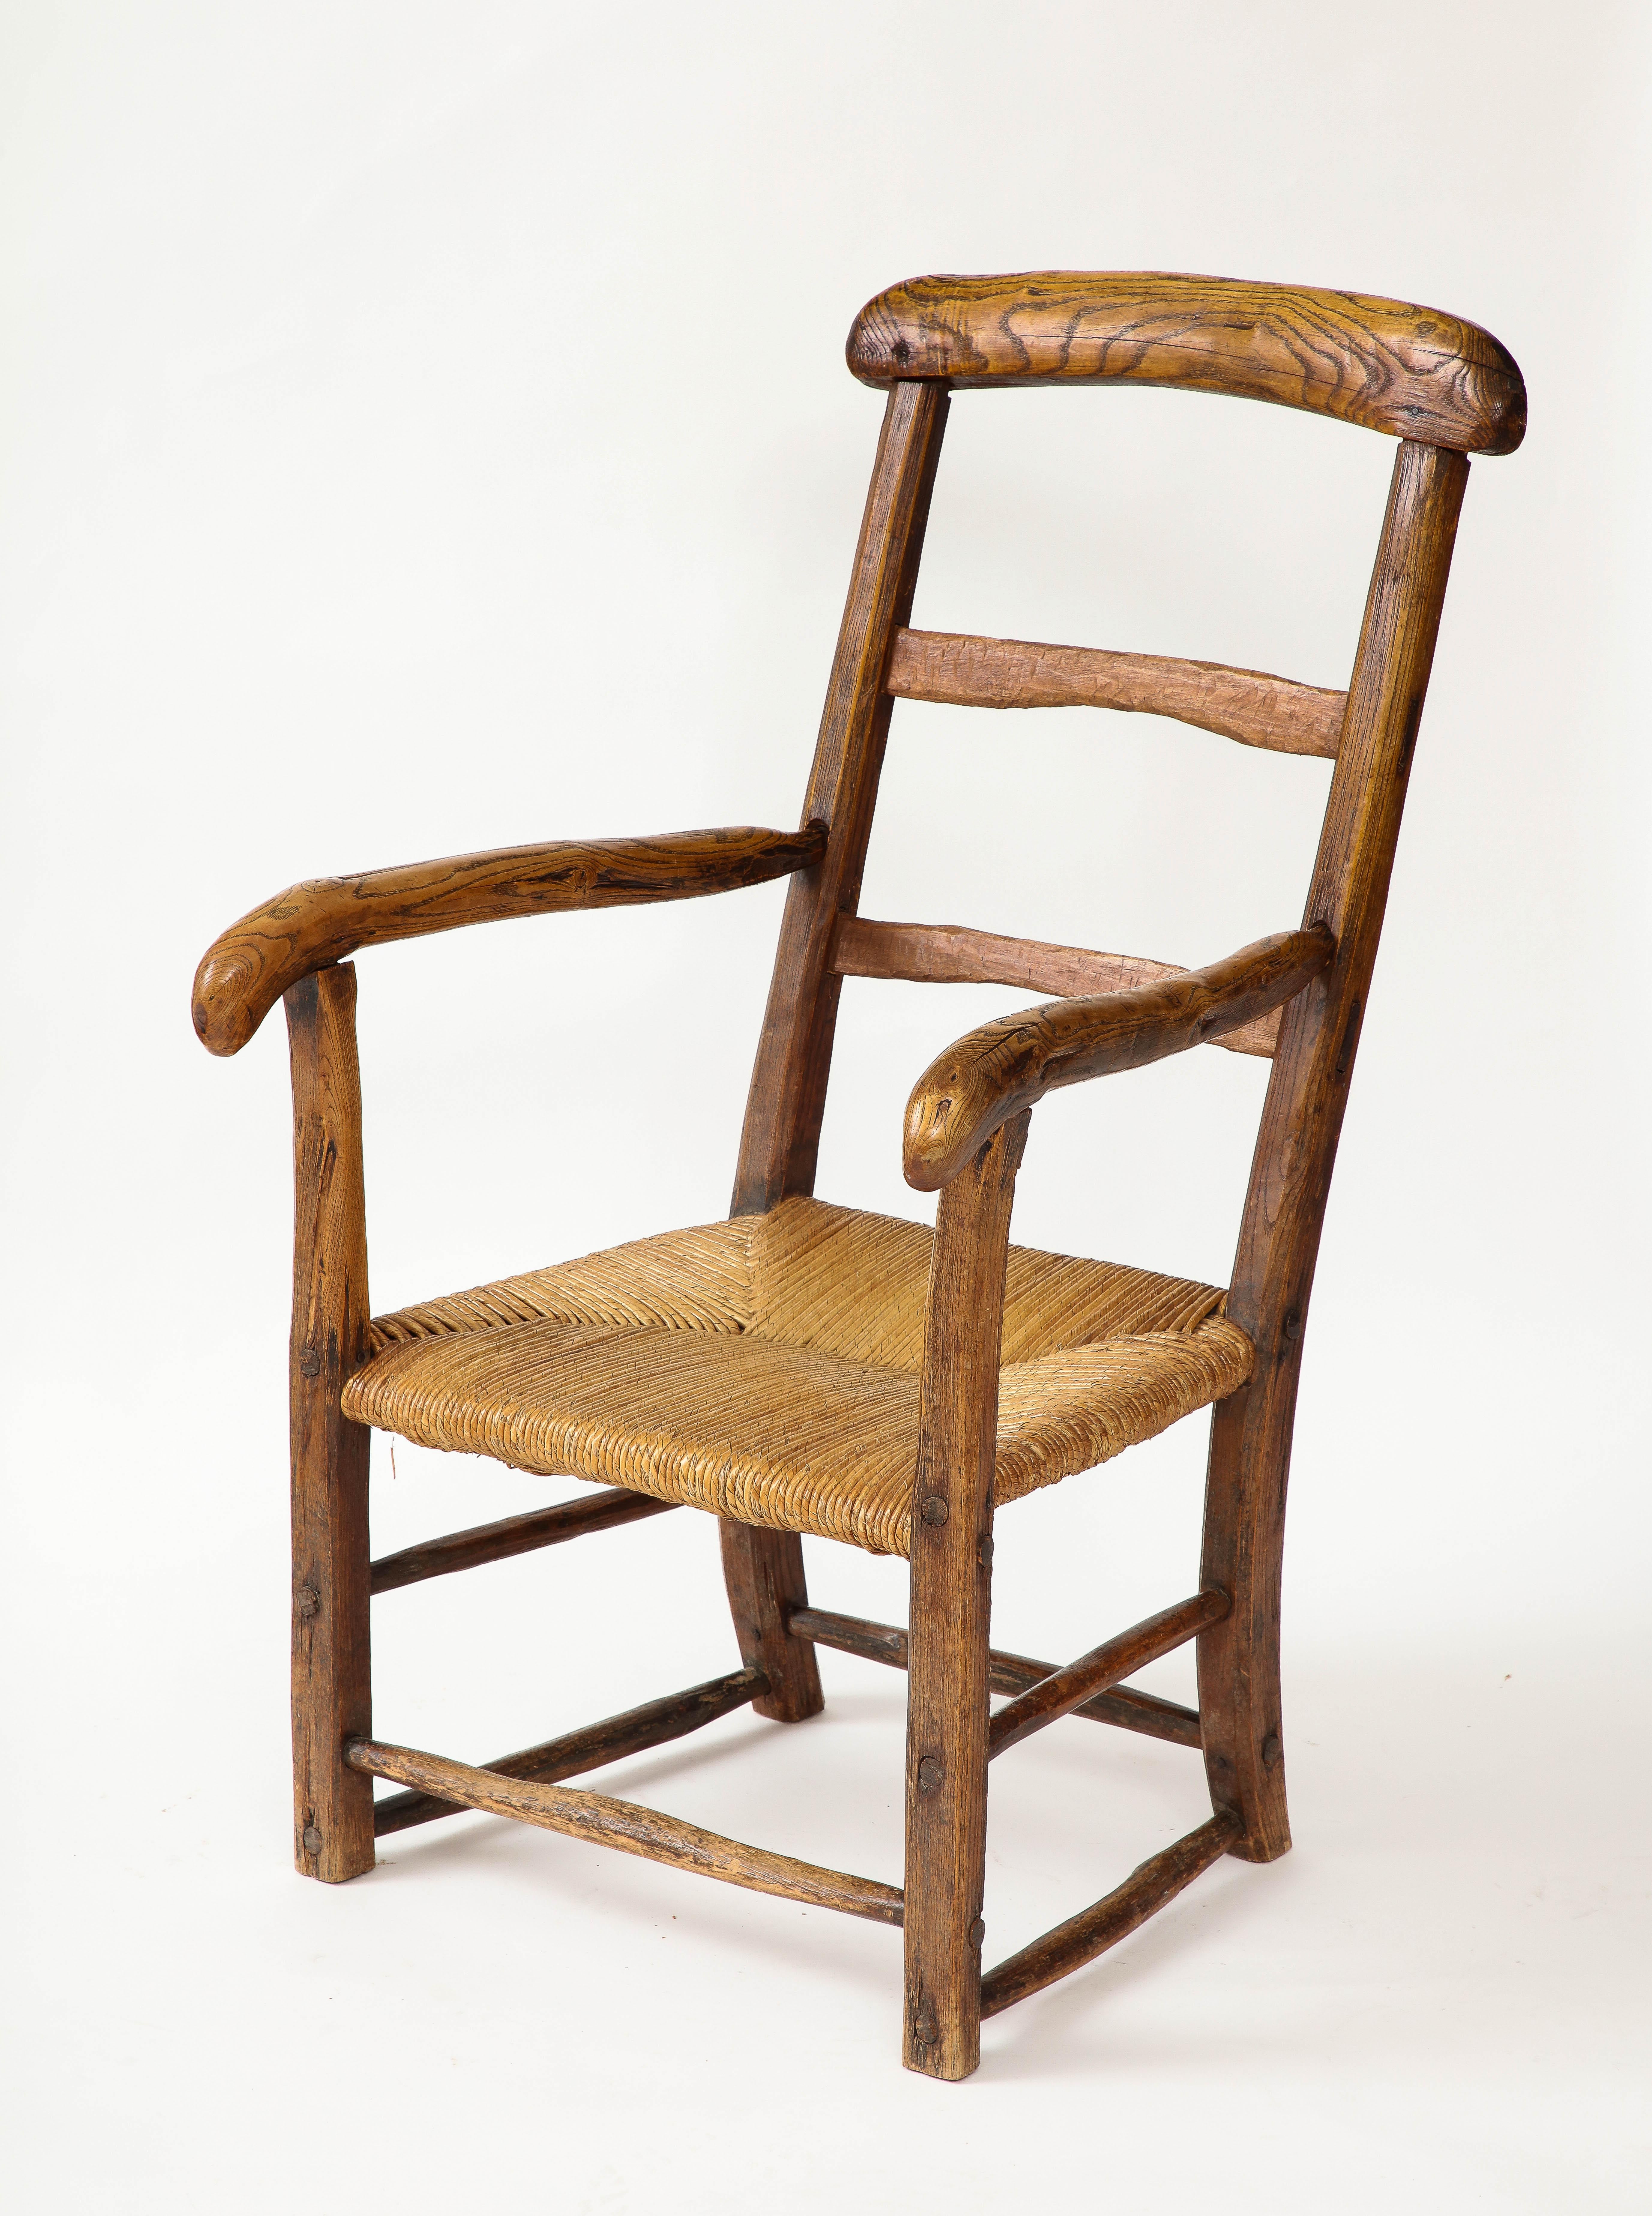 Rustic Hand Made Thatched Seat Chair, France, Rhone Alps Region

Beautiful grain & Patina

Seat h: 13-13.5 in.